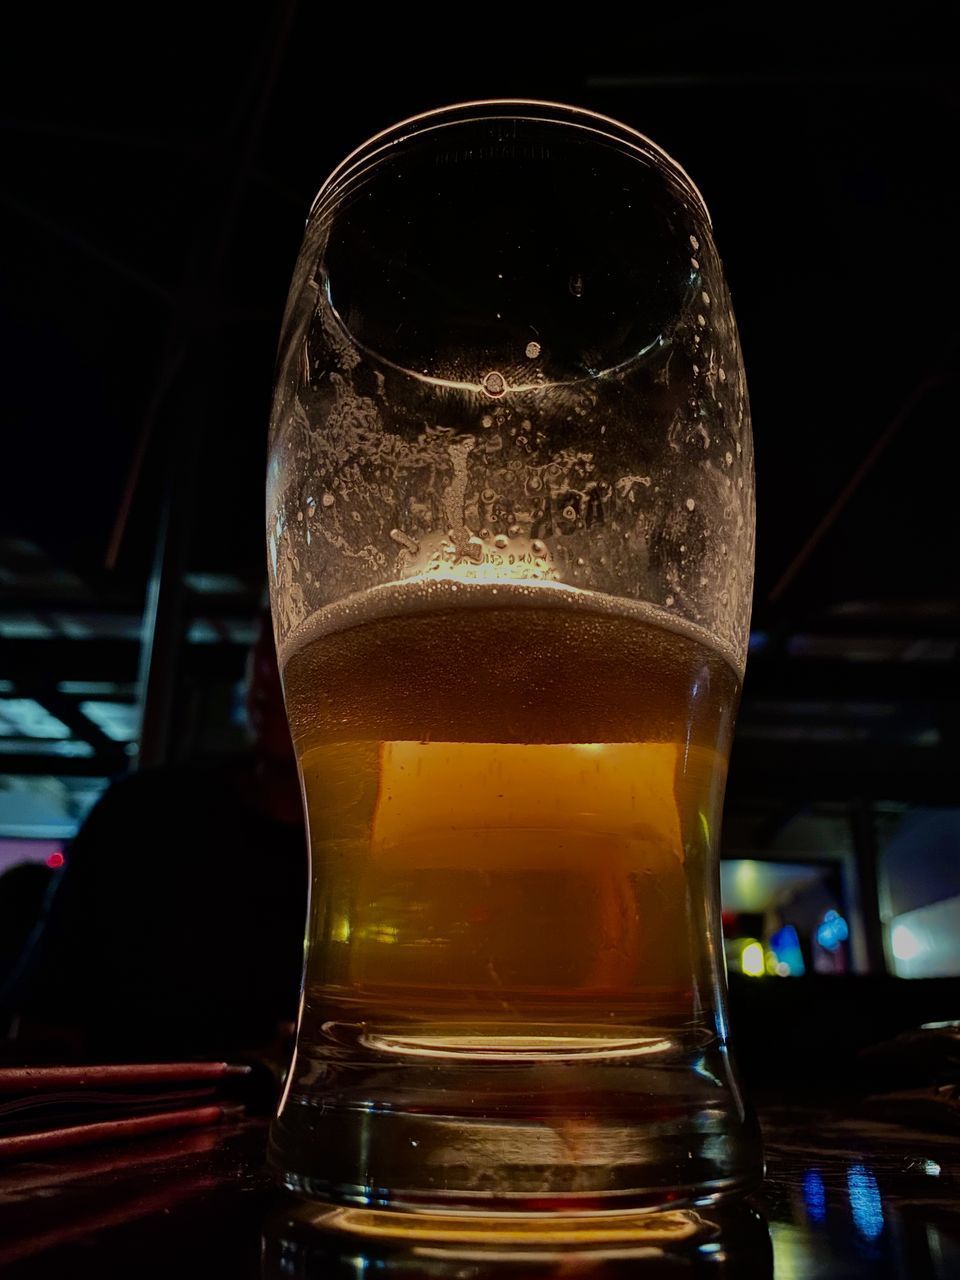 CLOSE-UP OF GLASS OF BEER